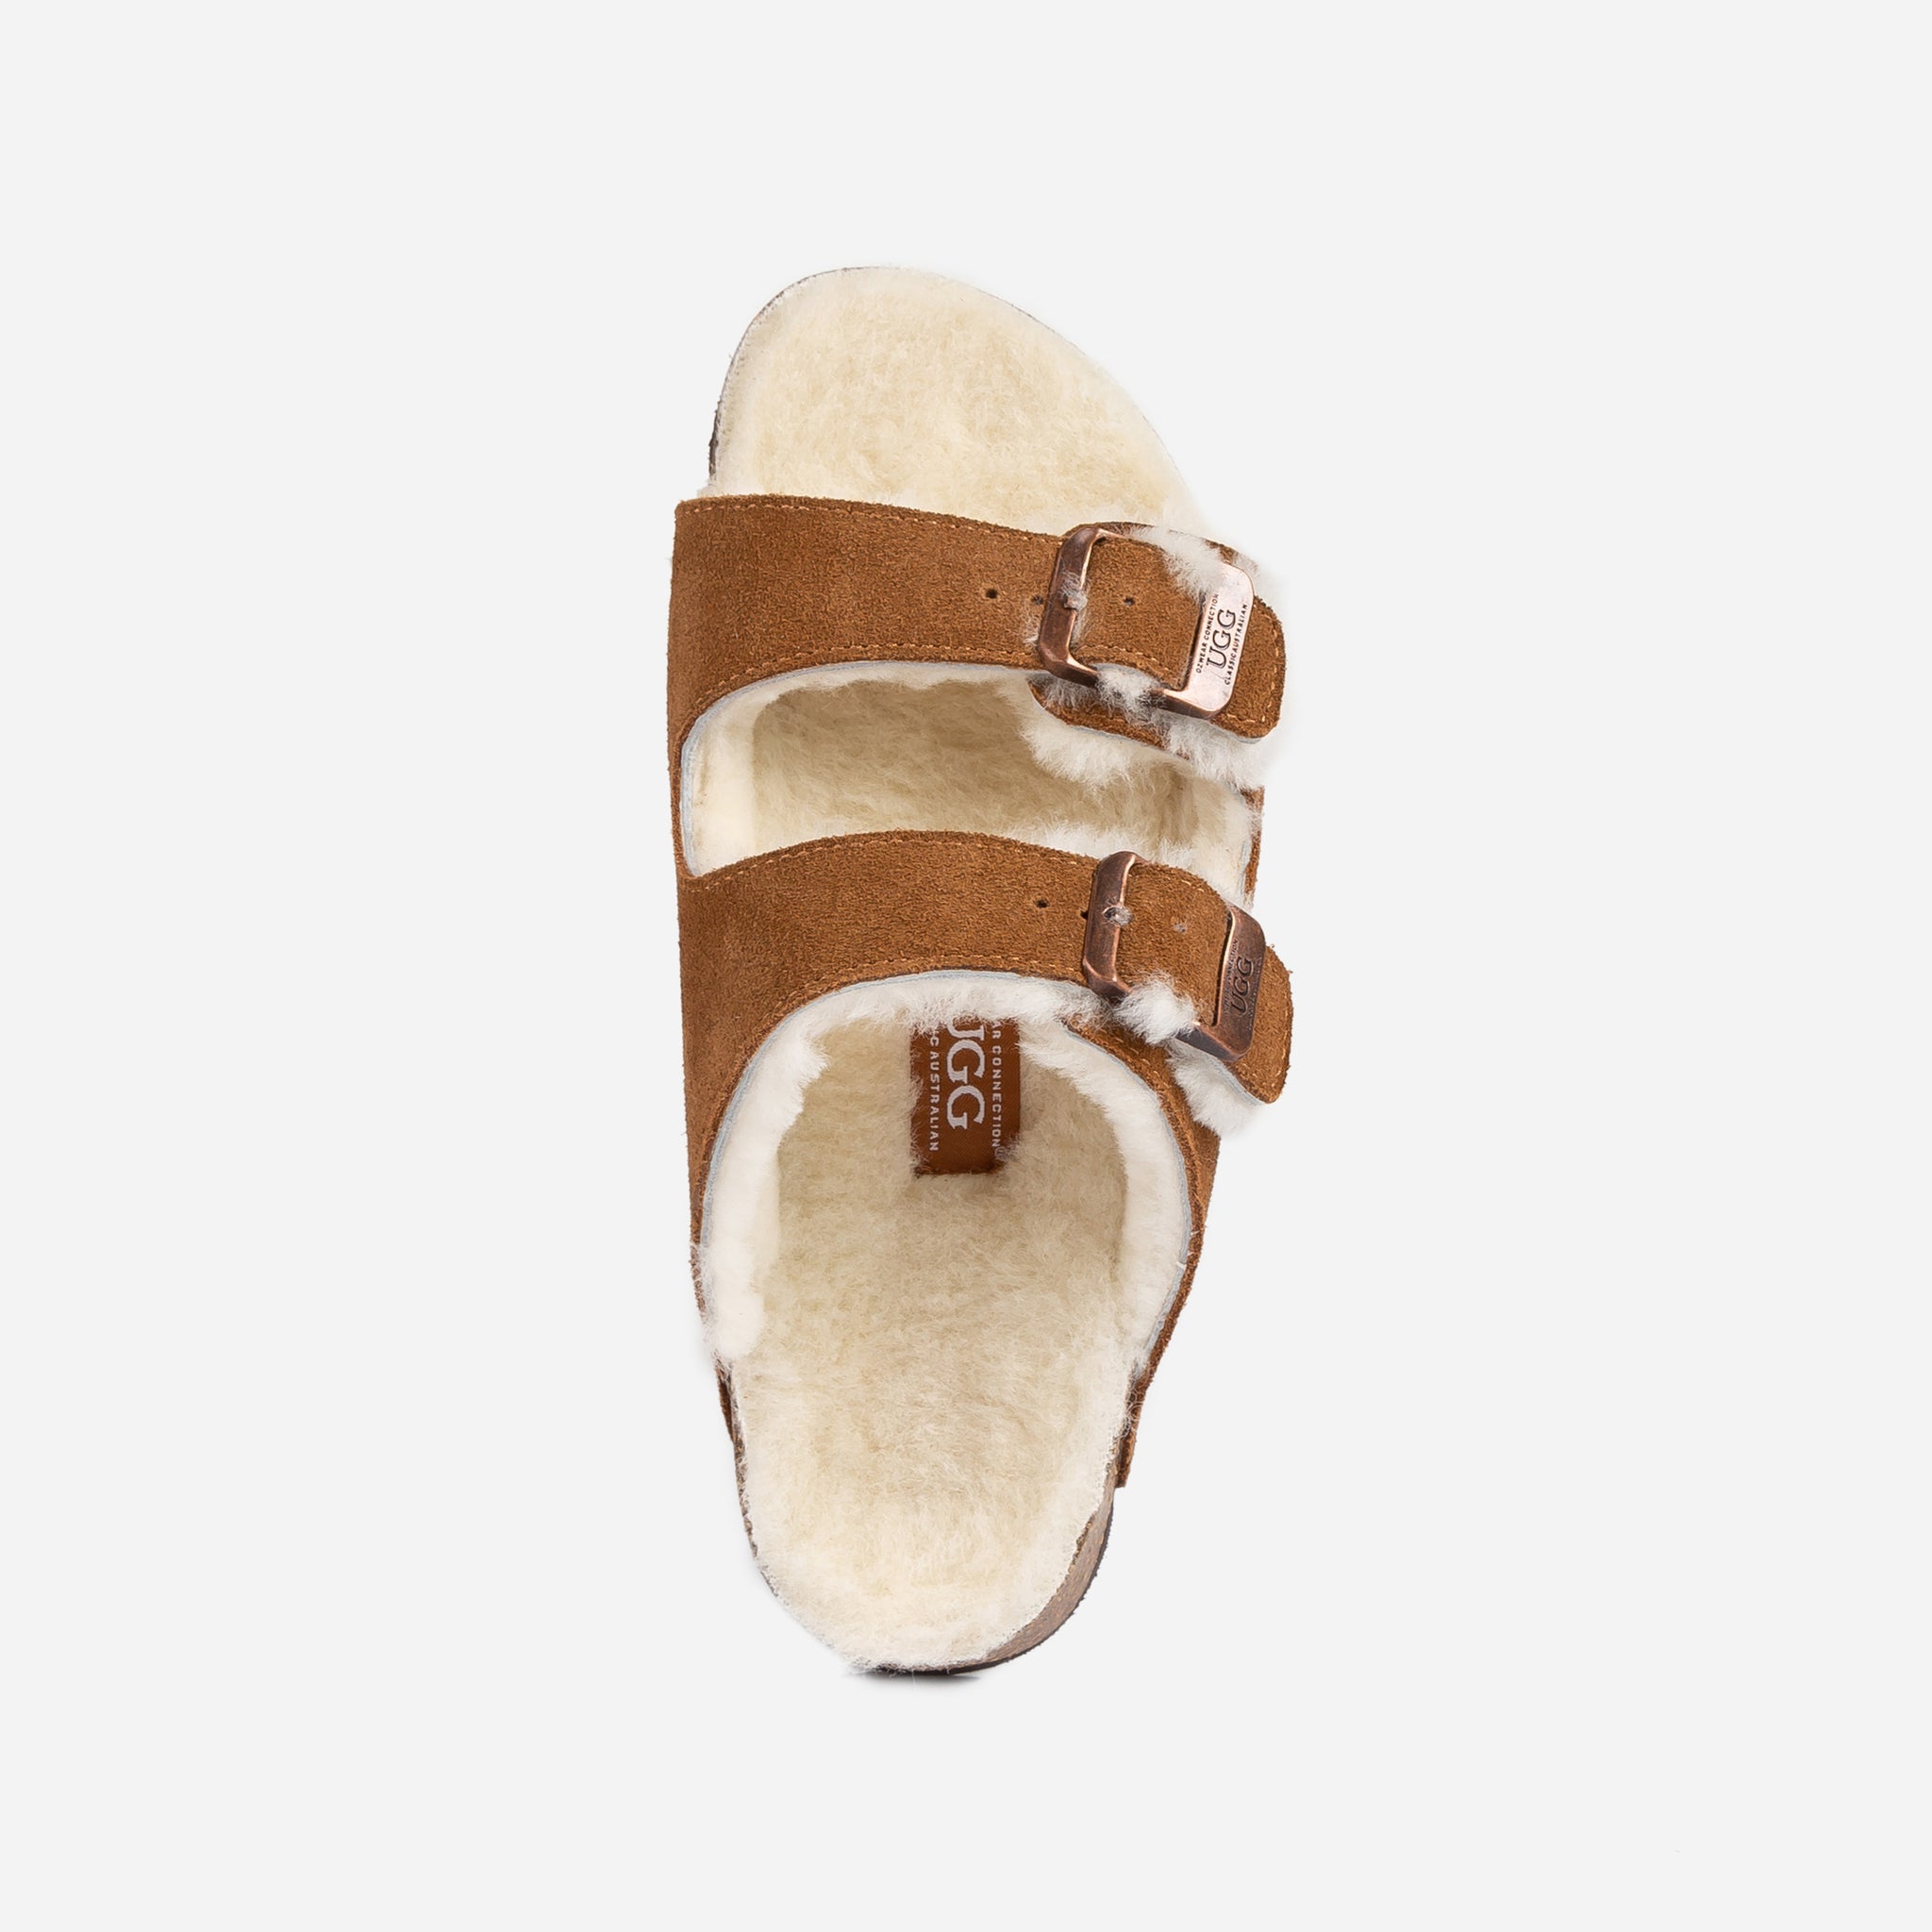 UGG Aussie Shearling Buckled Sandals